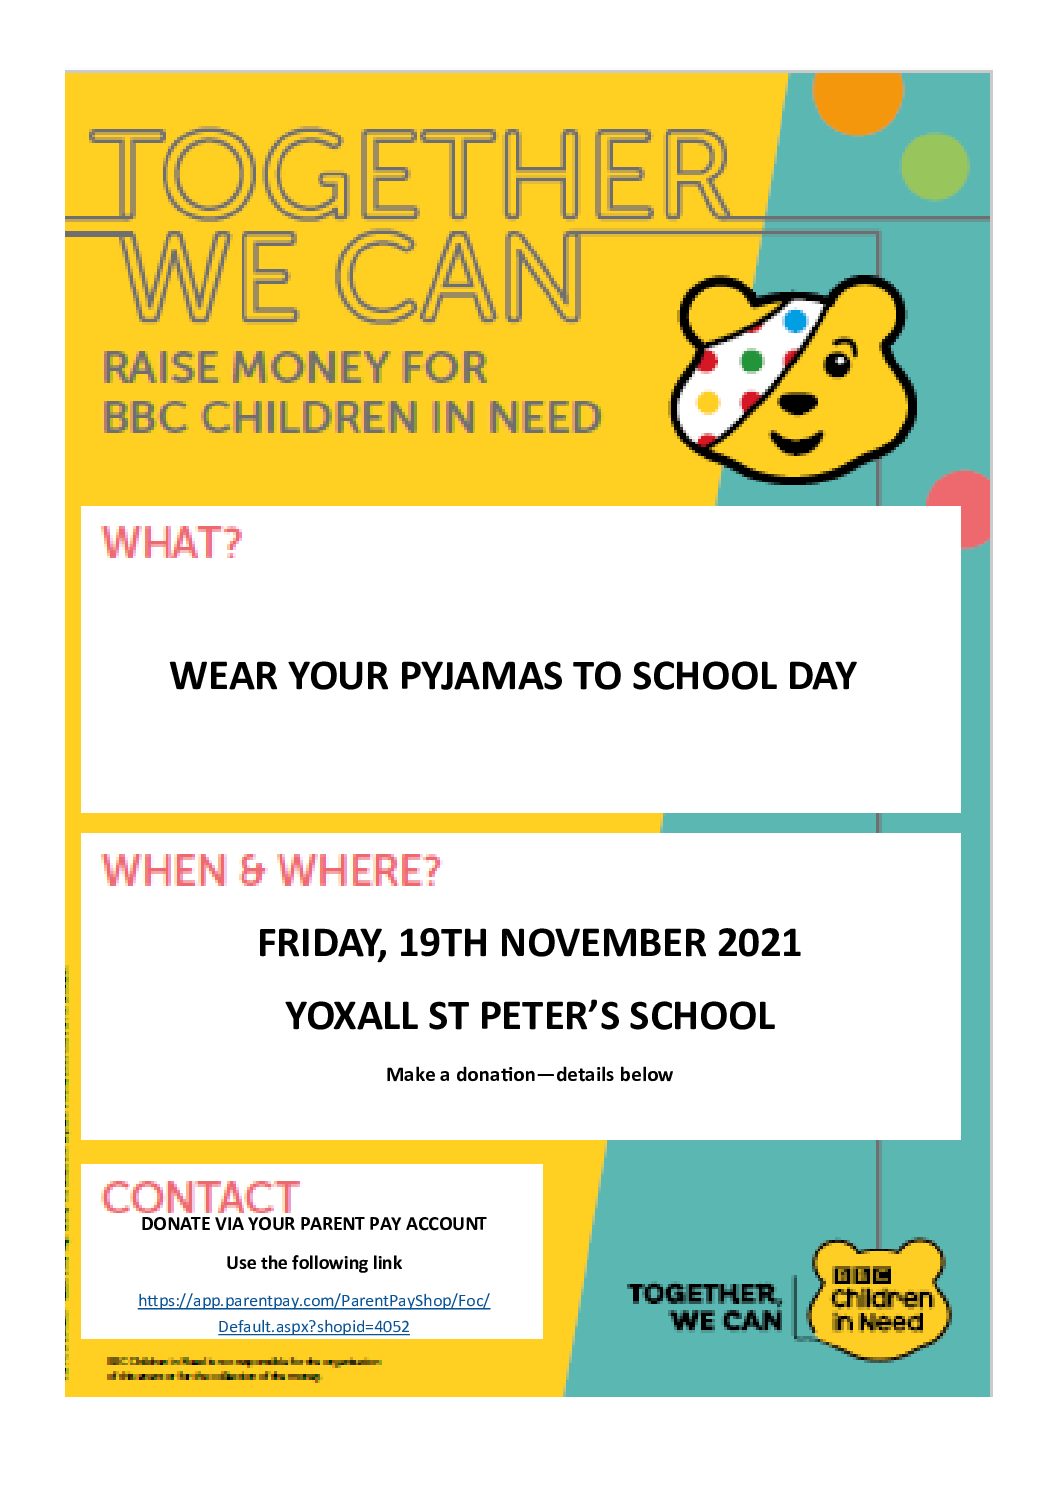 Children in Need – Wear your Pyjamas to School Day – Friday, 19th November 2021